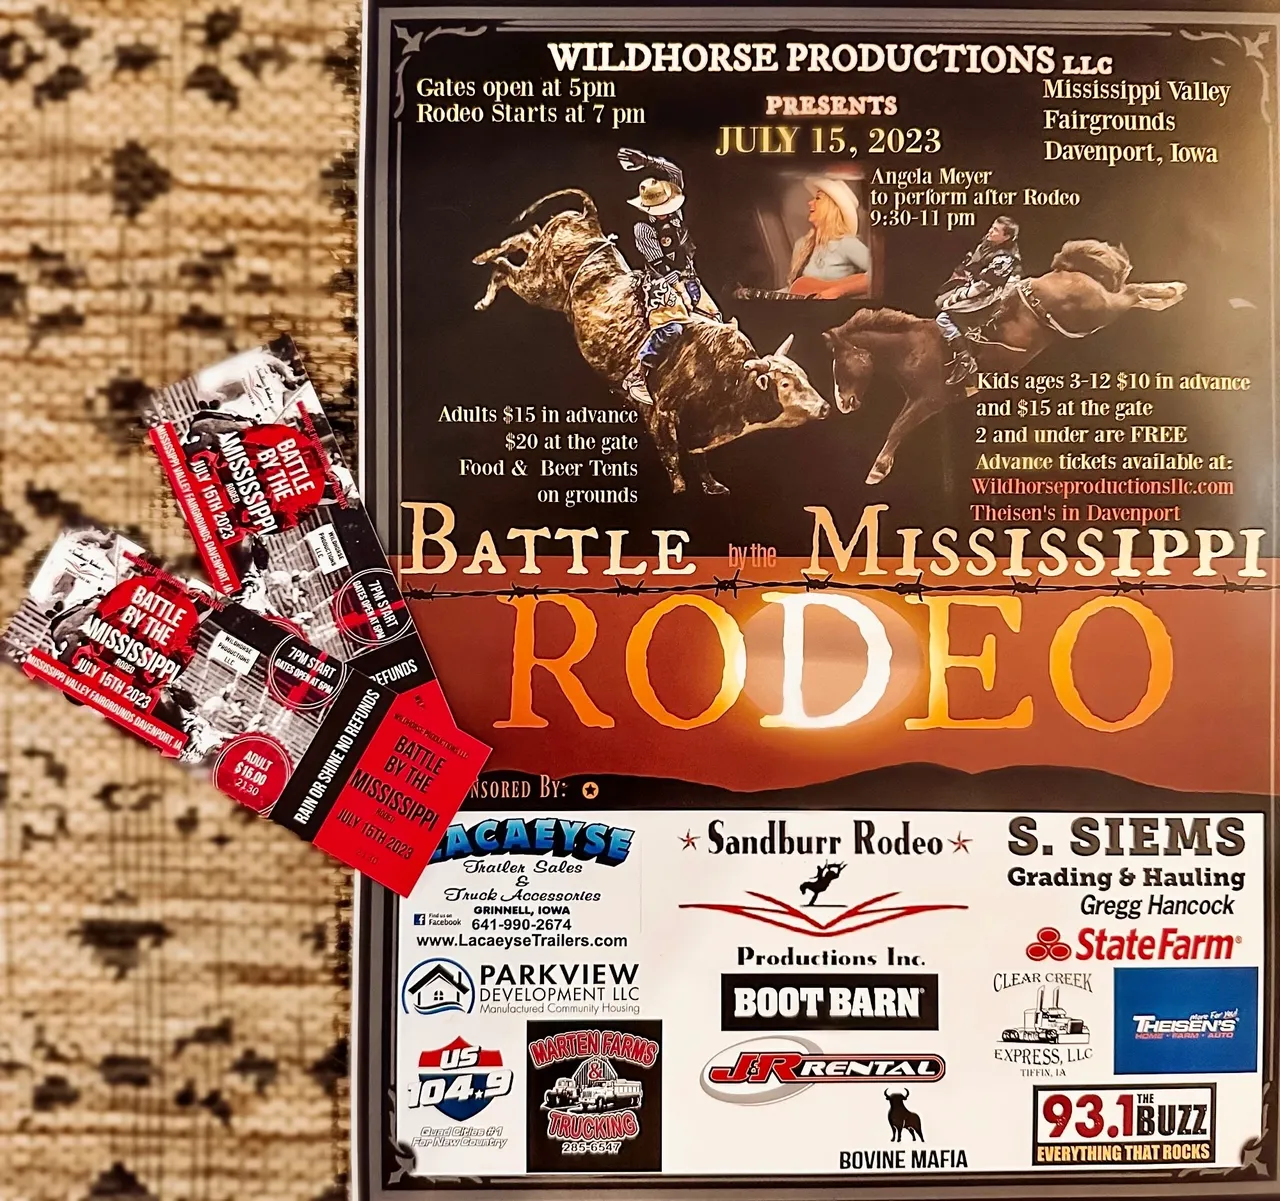 A poster of the battle of mississippi rodeo.